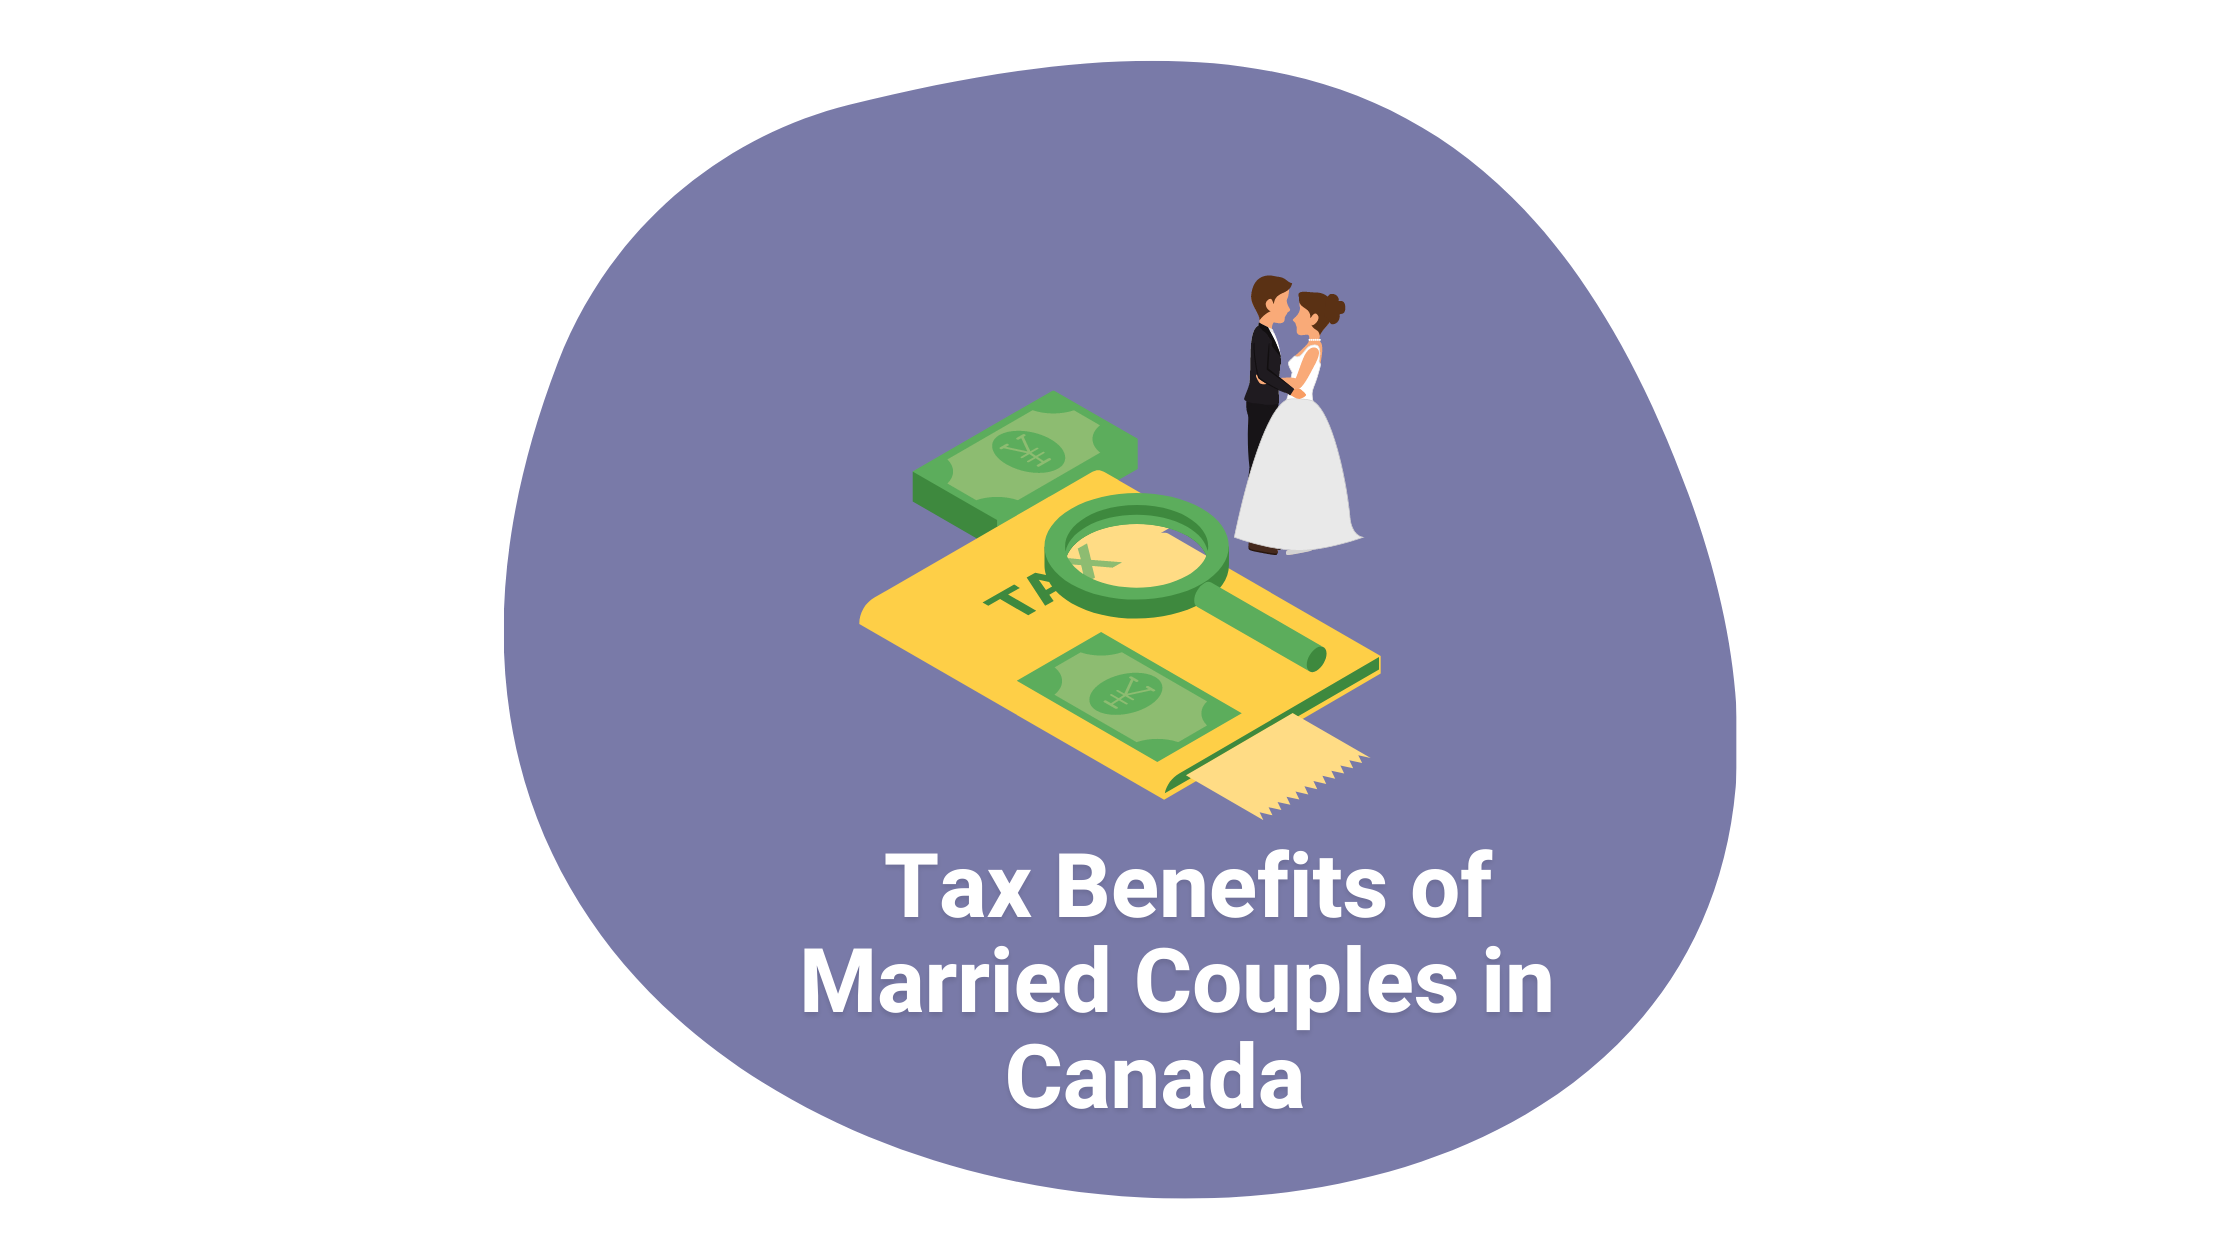 in-tax-i-do-tax-benefits-of-married-couples-in-canada-remitbee